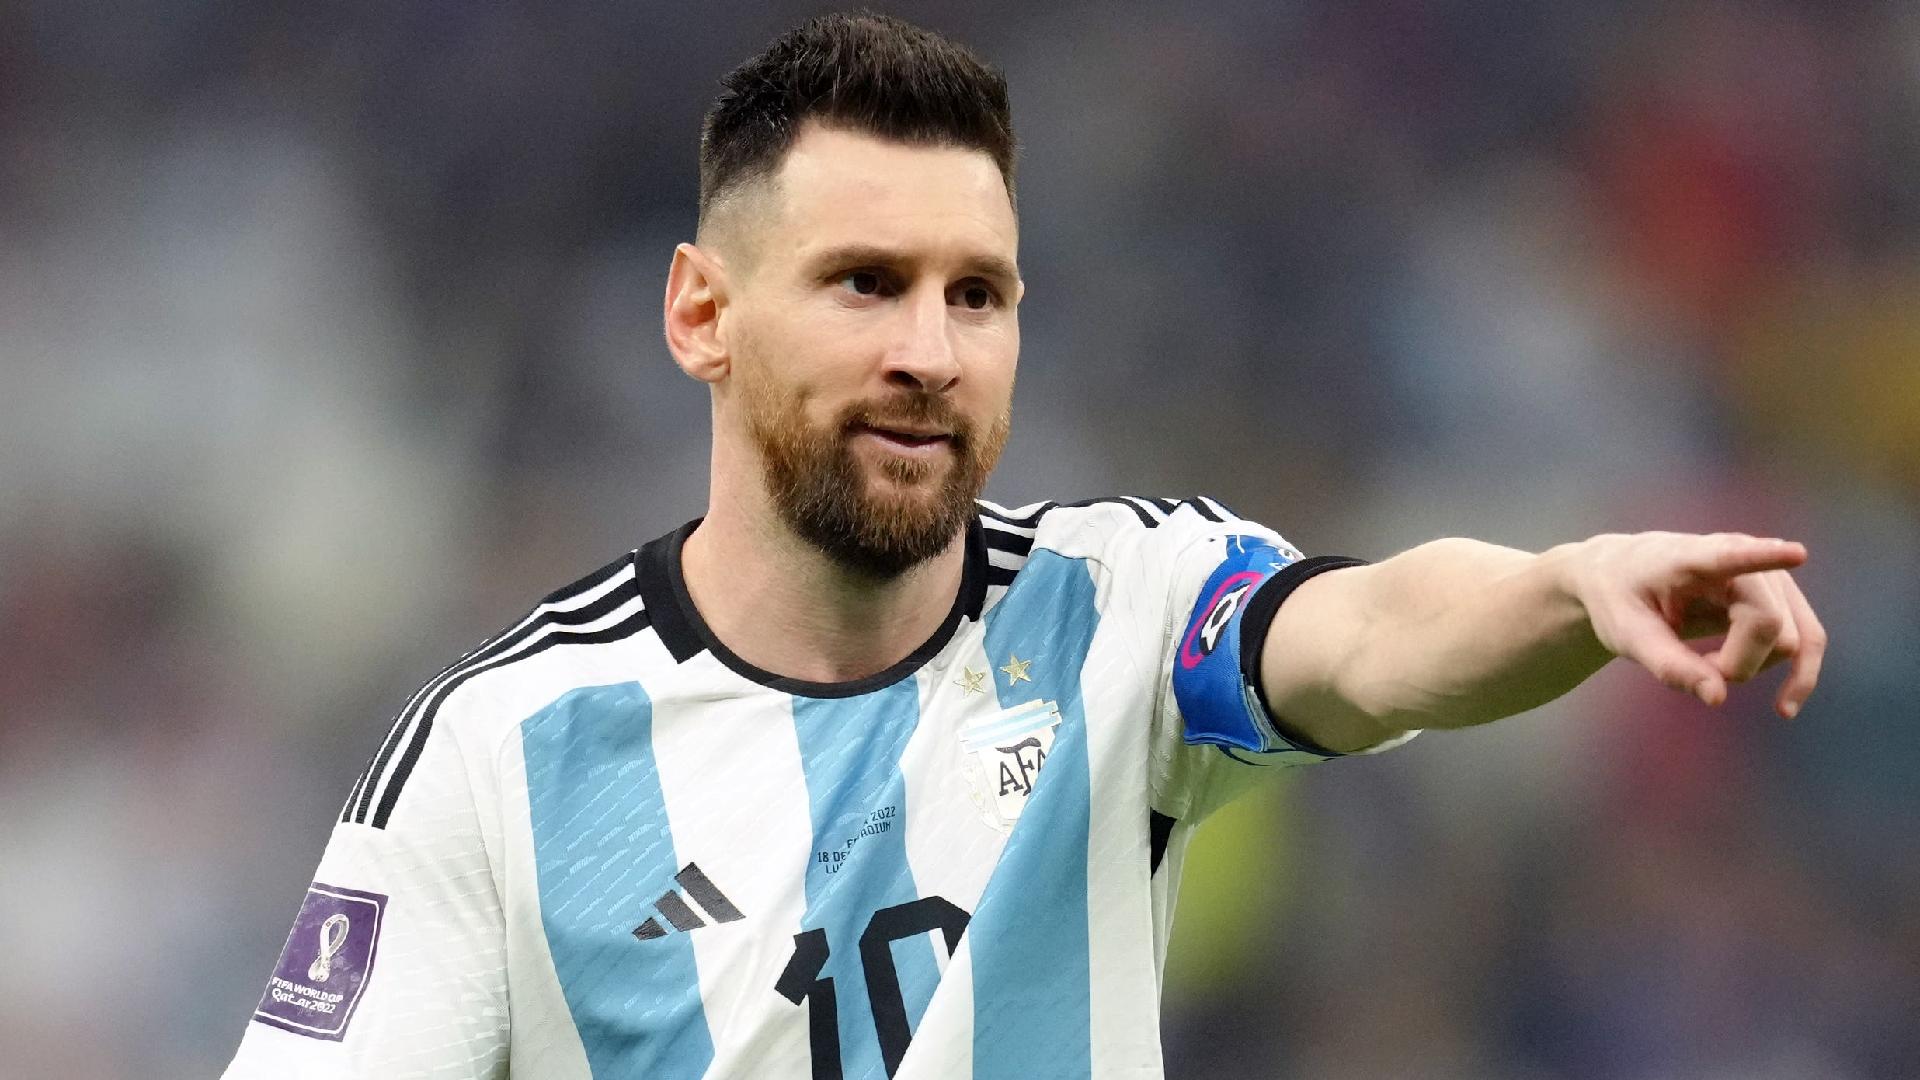 Hamstring injury rules Lionel Messi out of Argentina friendlies